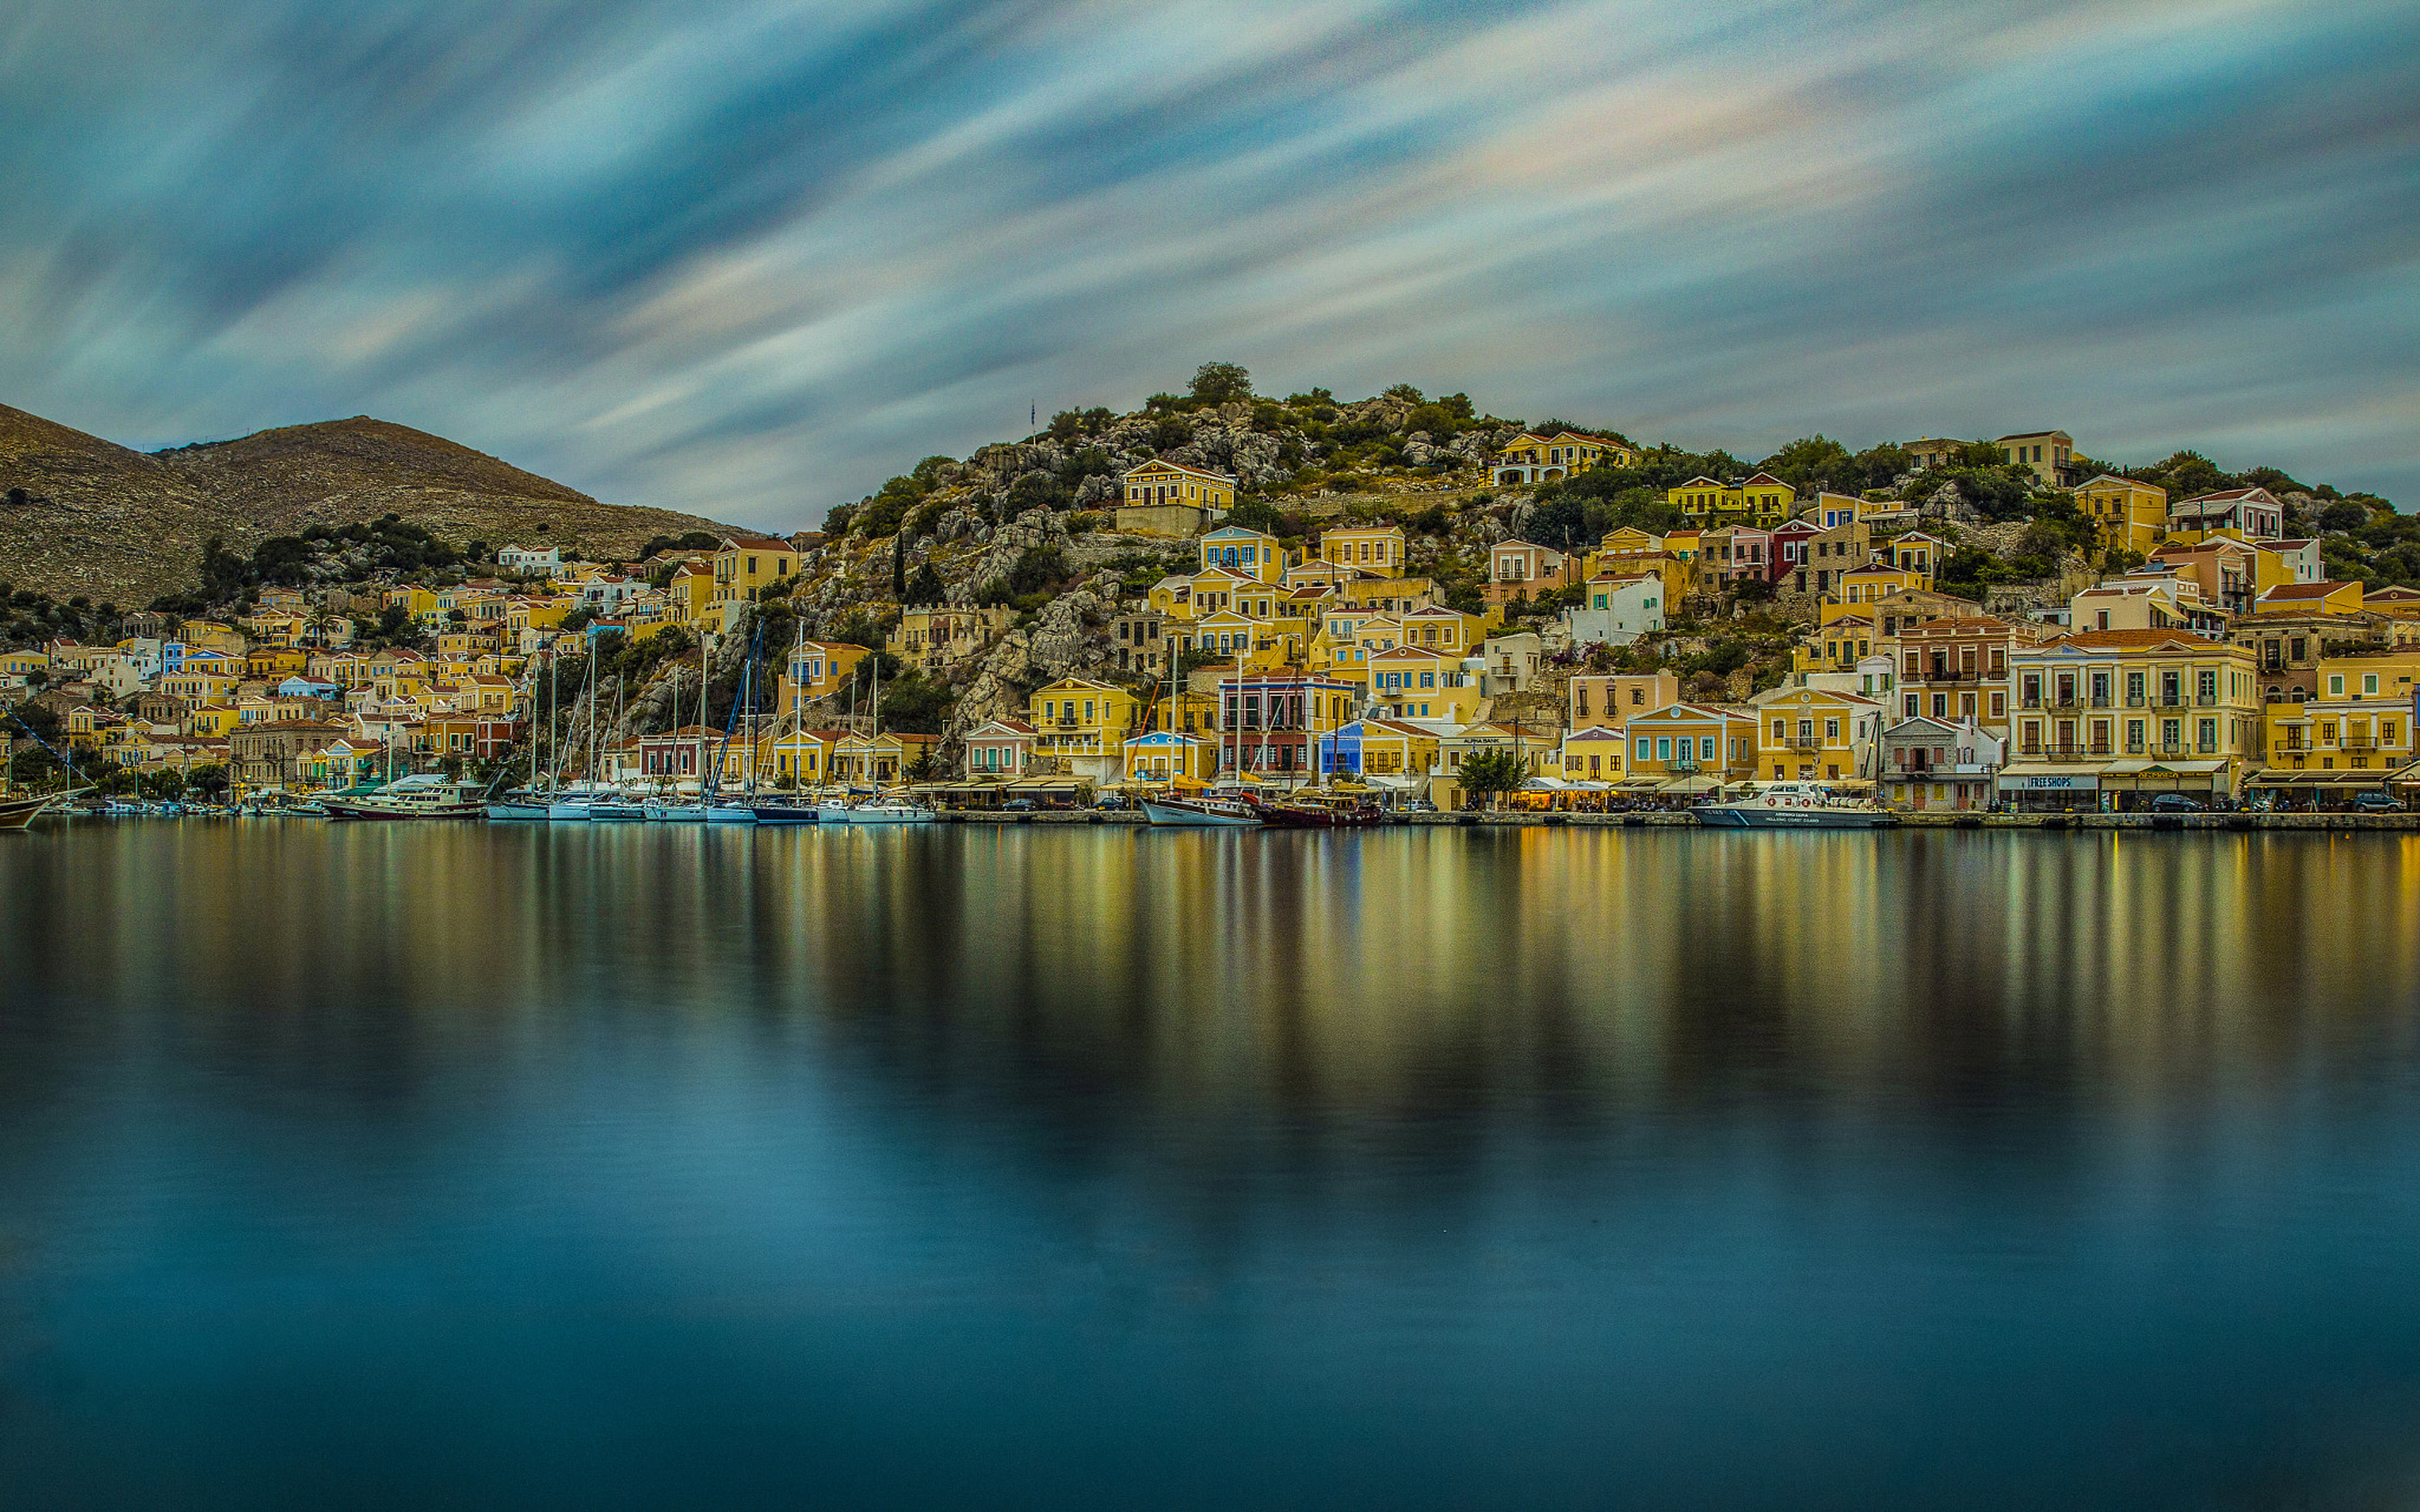 Symi İsland In Greece Part Of The Islands Group Of Dodecanese Surrounded By Colorful Neoclassical Houses 4k Ultra HD Wallpaper For Desktop Lapx2400, Wallpaper13.com